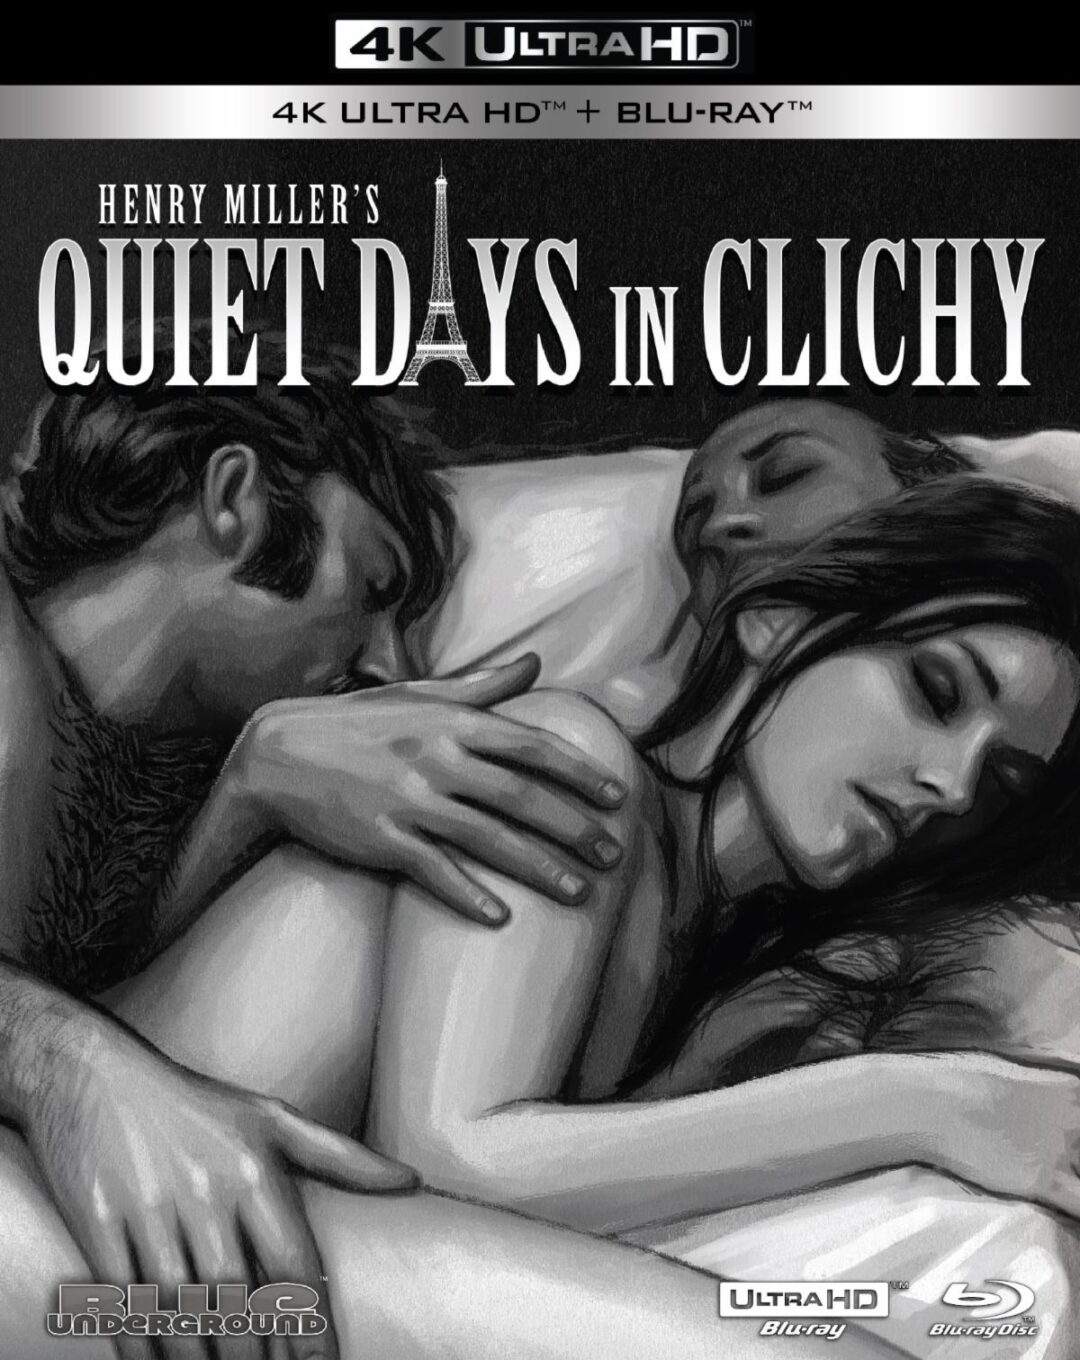 Quiet Days in Clichy brings Henry Miller’s story to 4K UHD